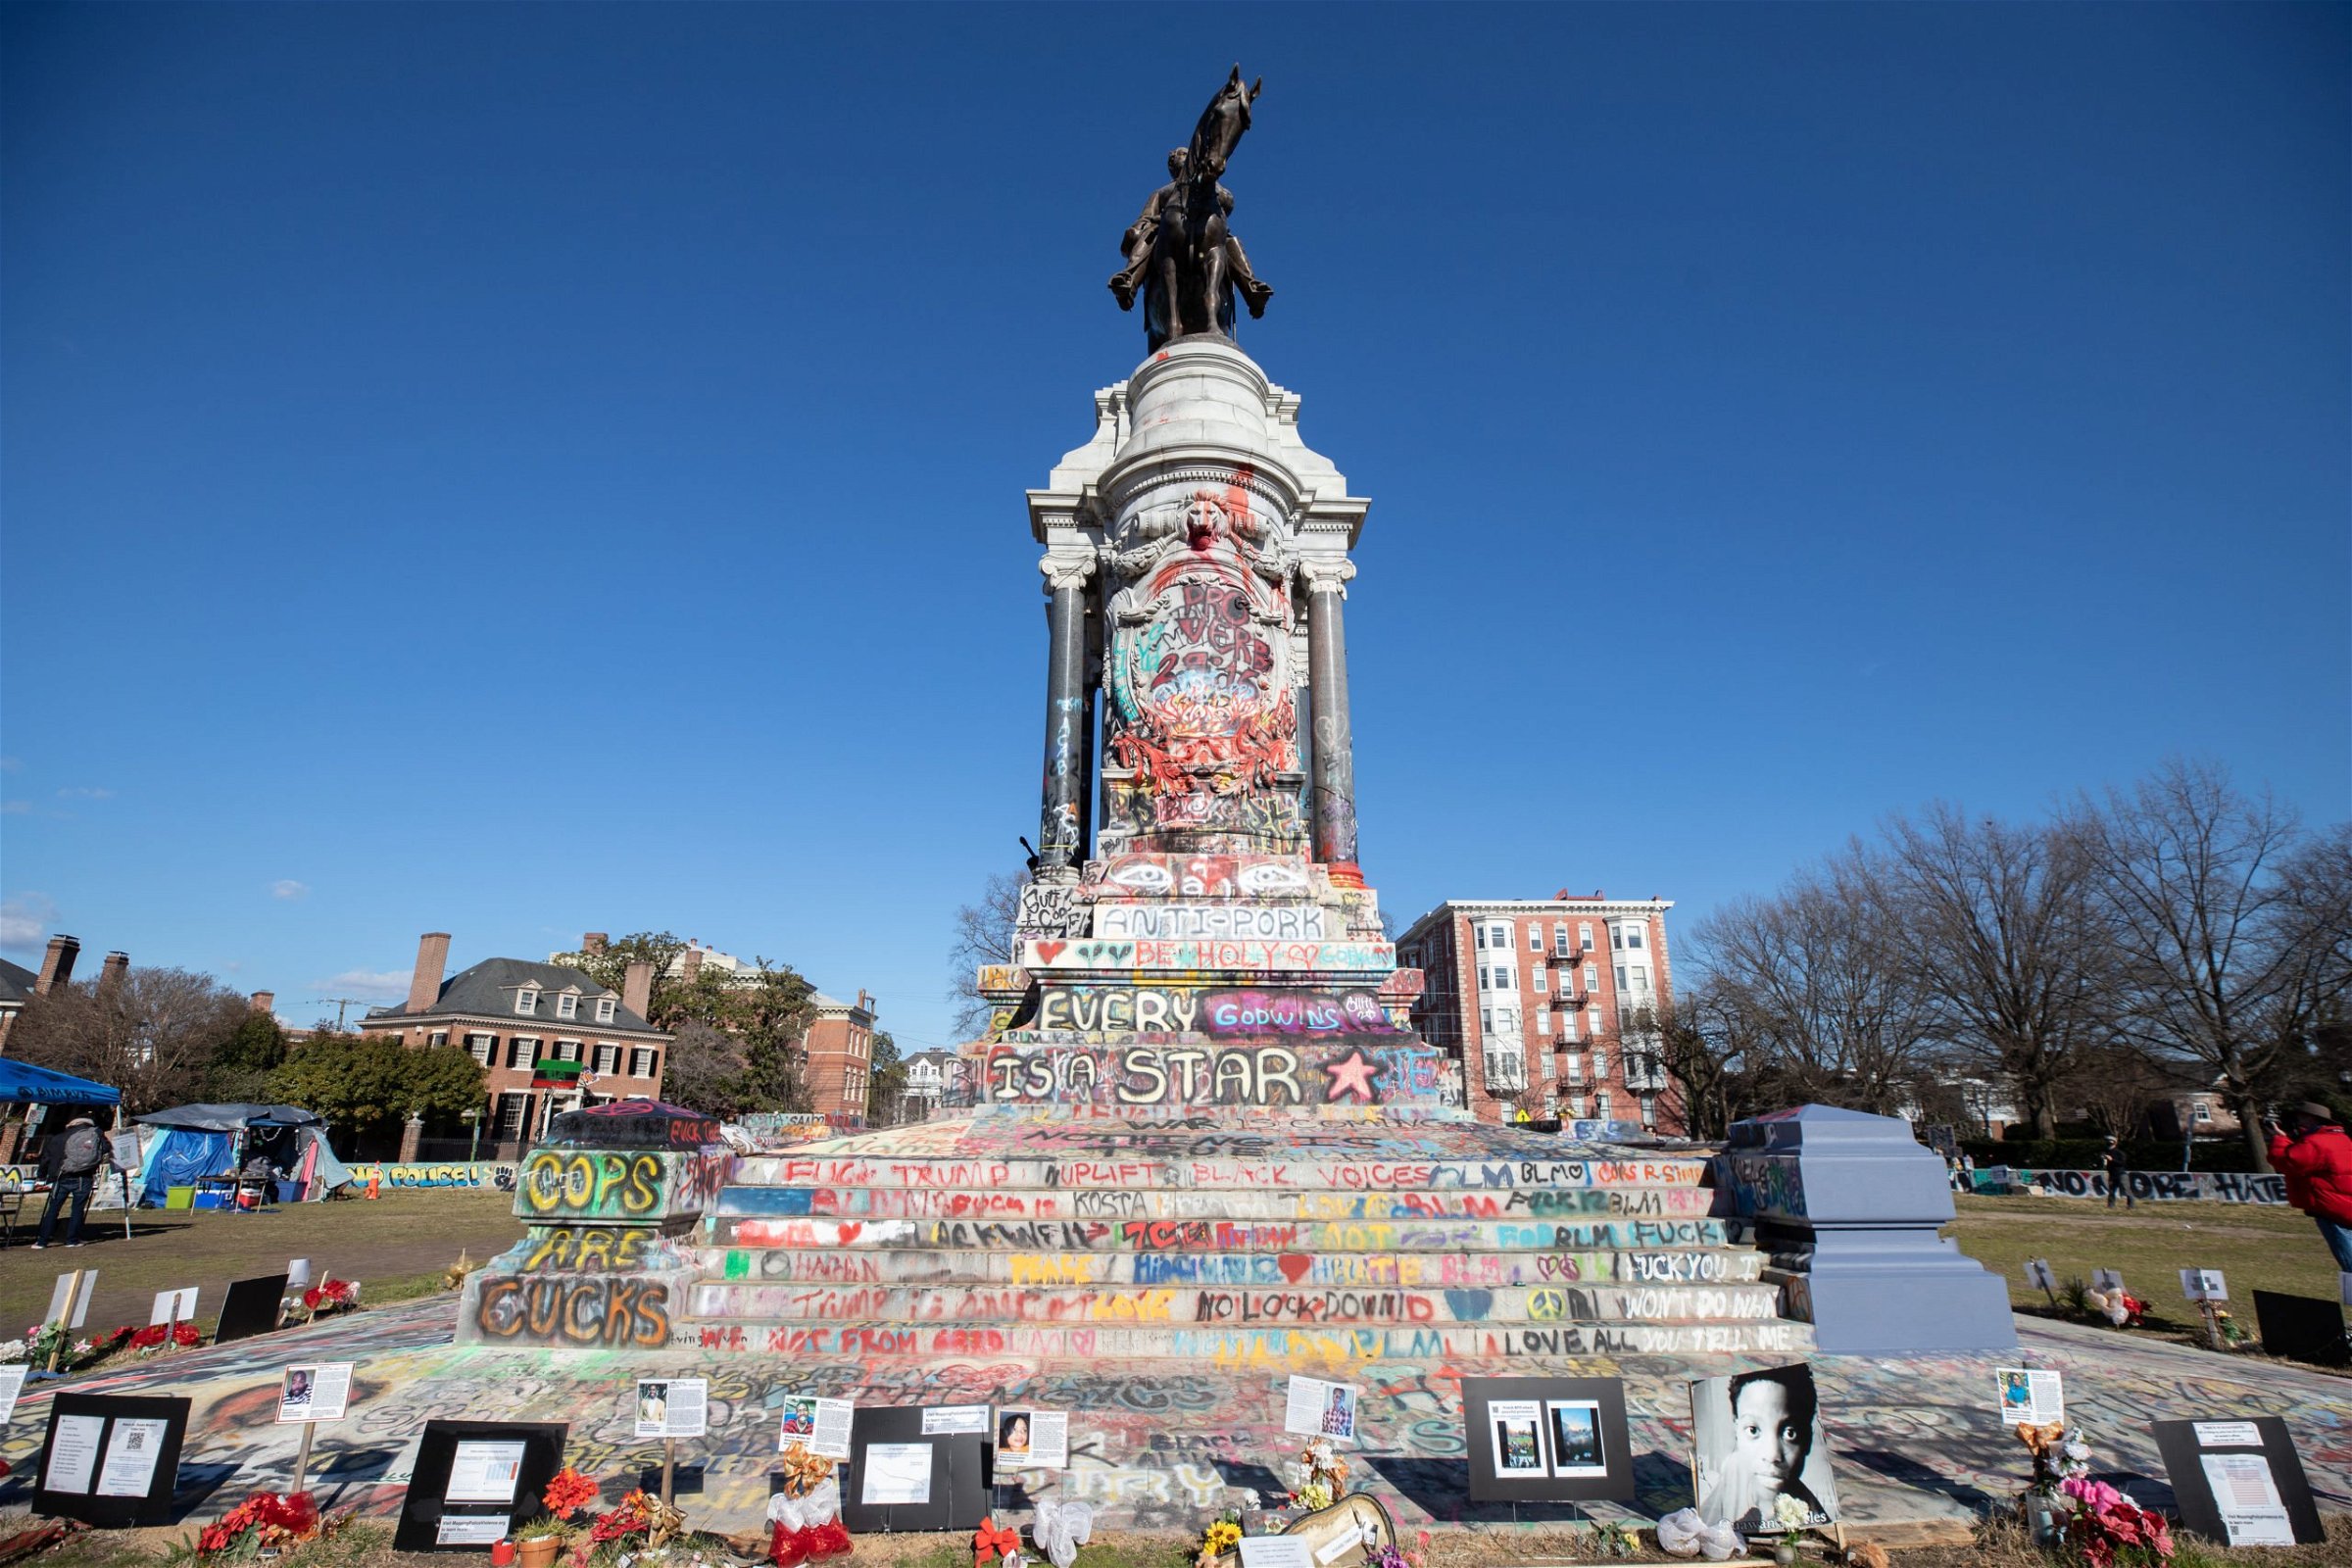 The Robert E. Lee statue in Richmond, Virginia, has been transformed into a piece of what community members call protest art where people gather to participate in mutual aid, play sports and garden, Jan. 17, 2021. (Kaylee Greenlee - Daily Caller News Foundation.) 